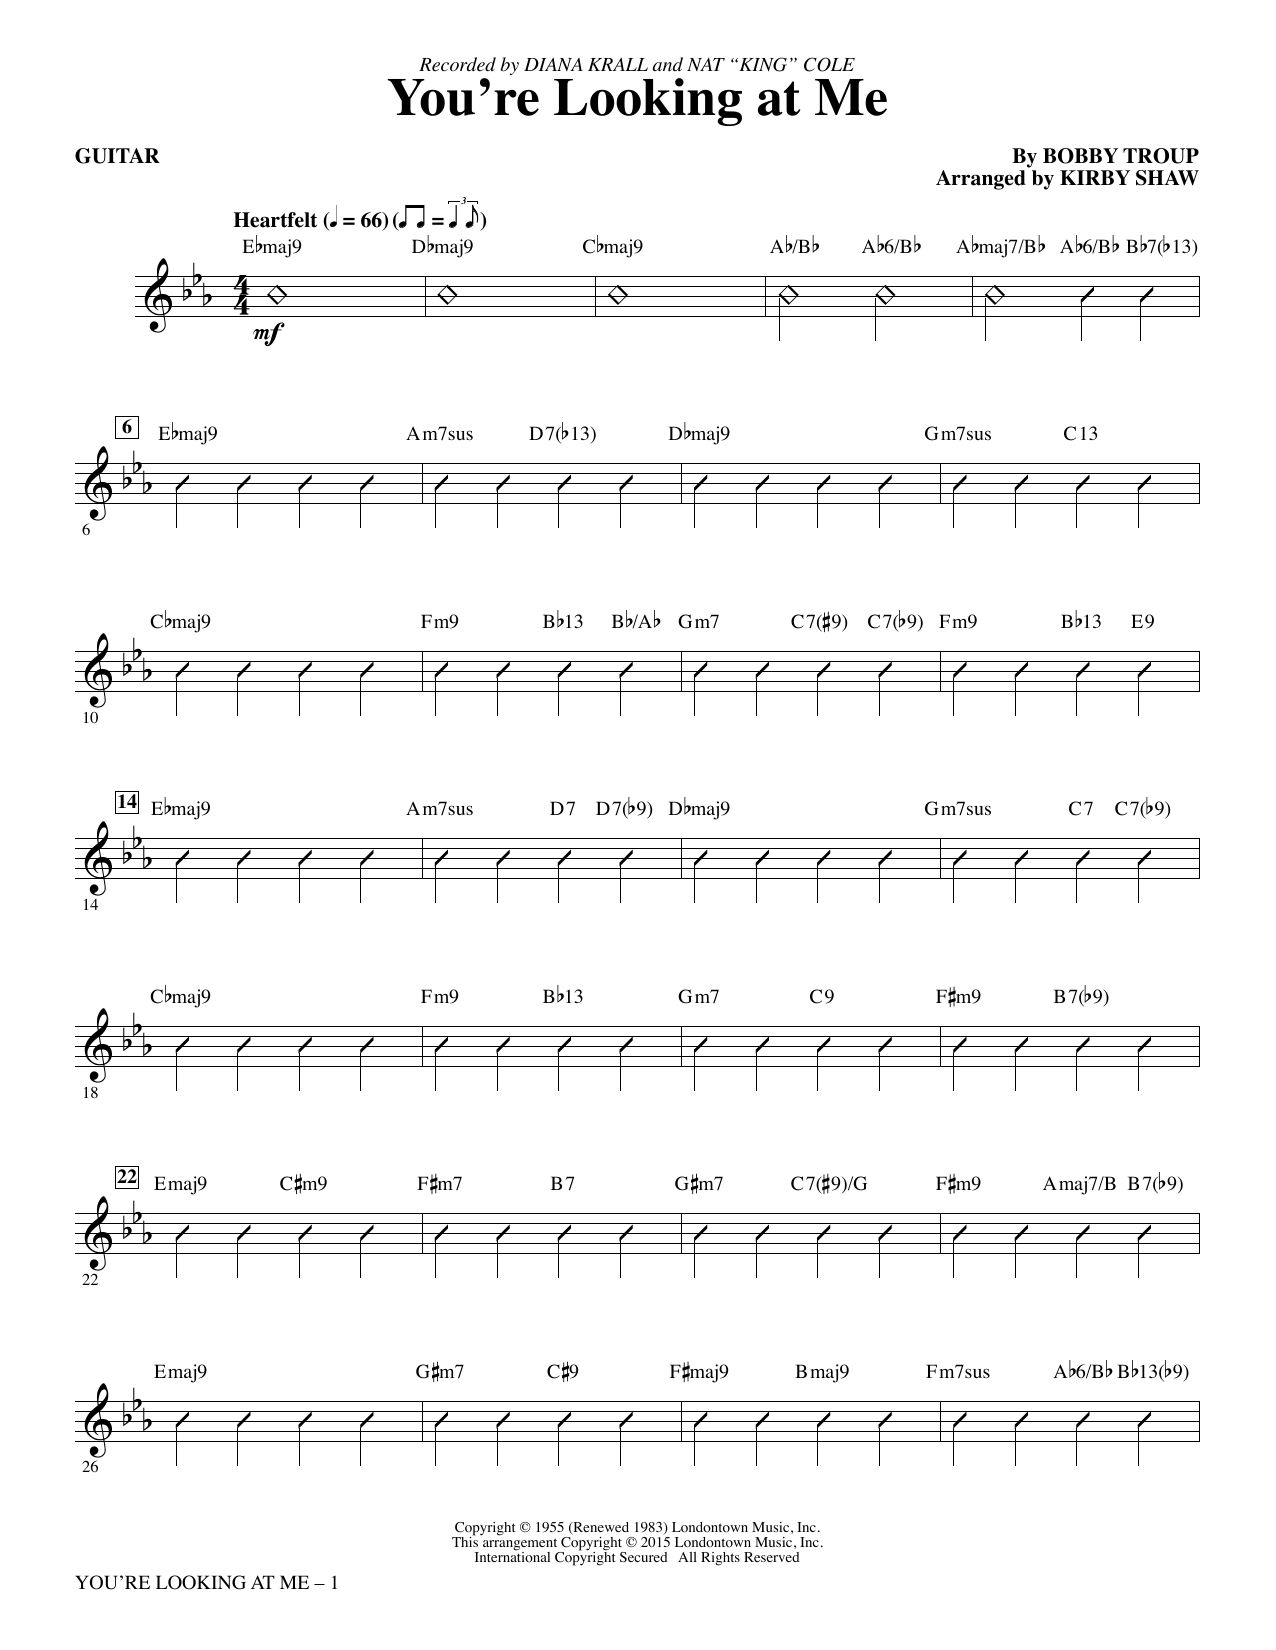 Kirby Shaw You're Looking At Me - Guitar sheet music notes and chords. Download Printable PDF.